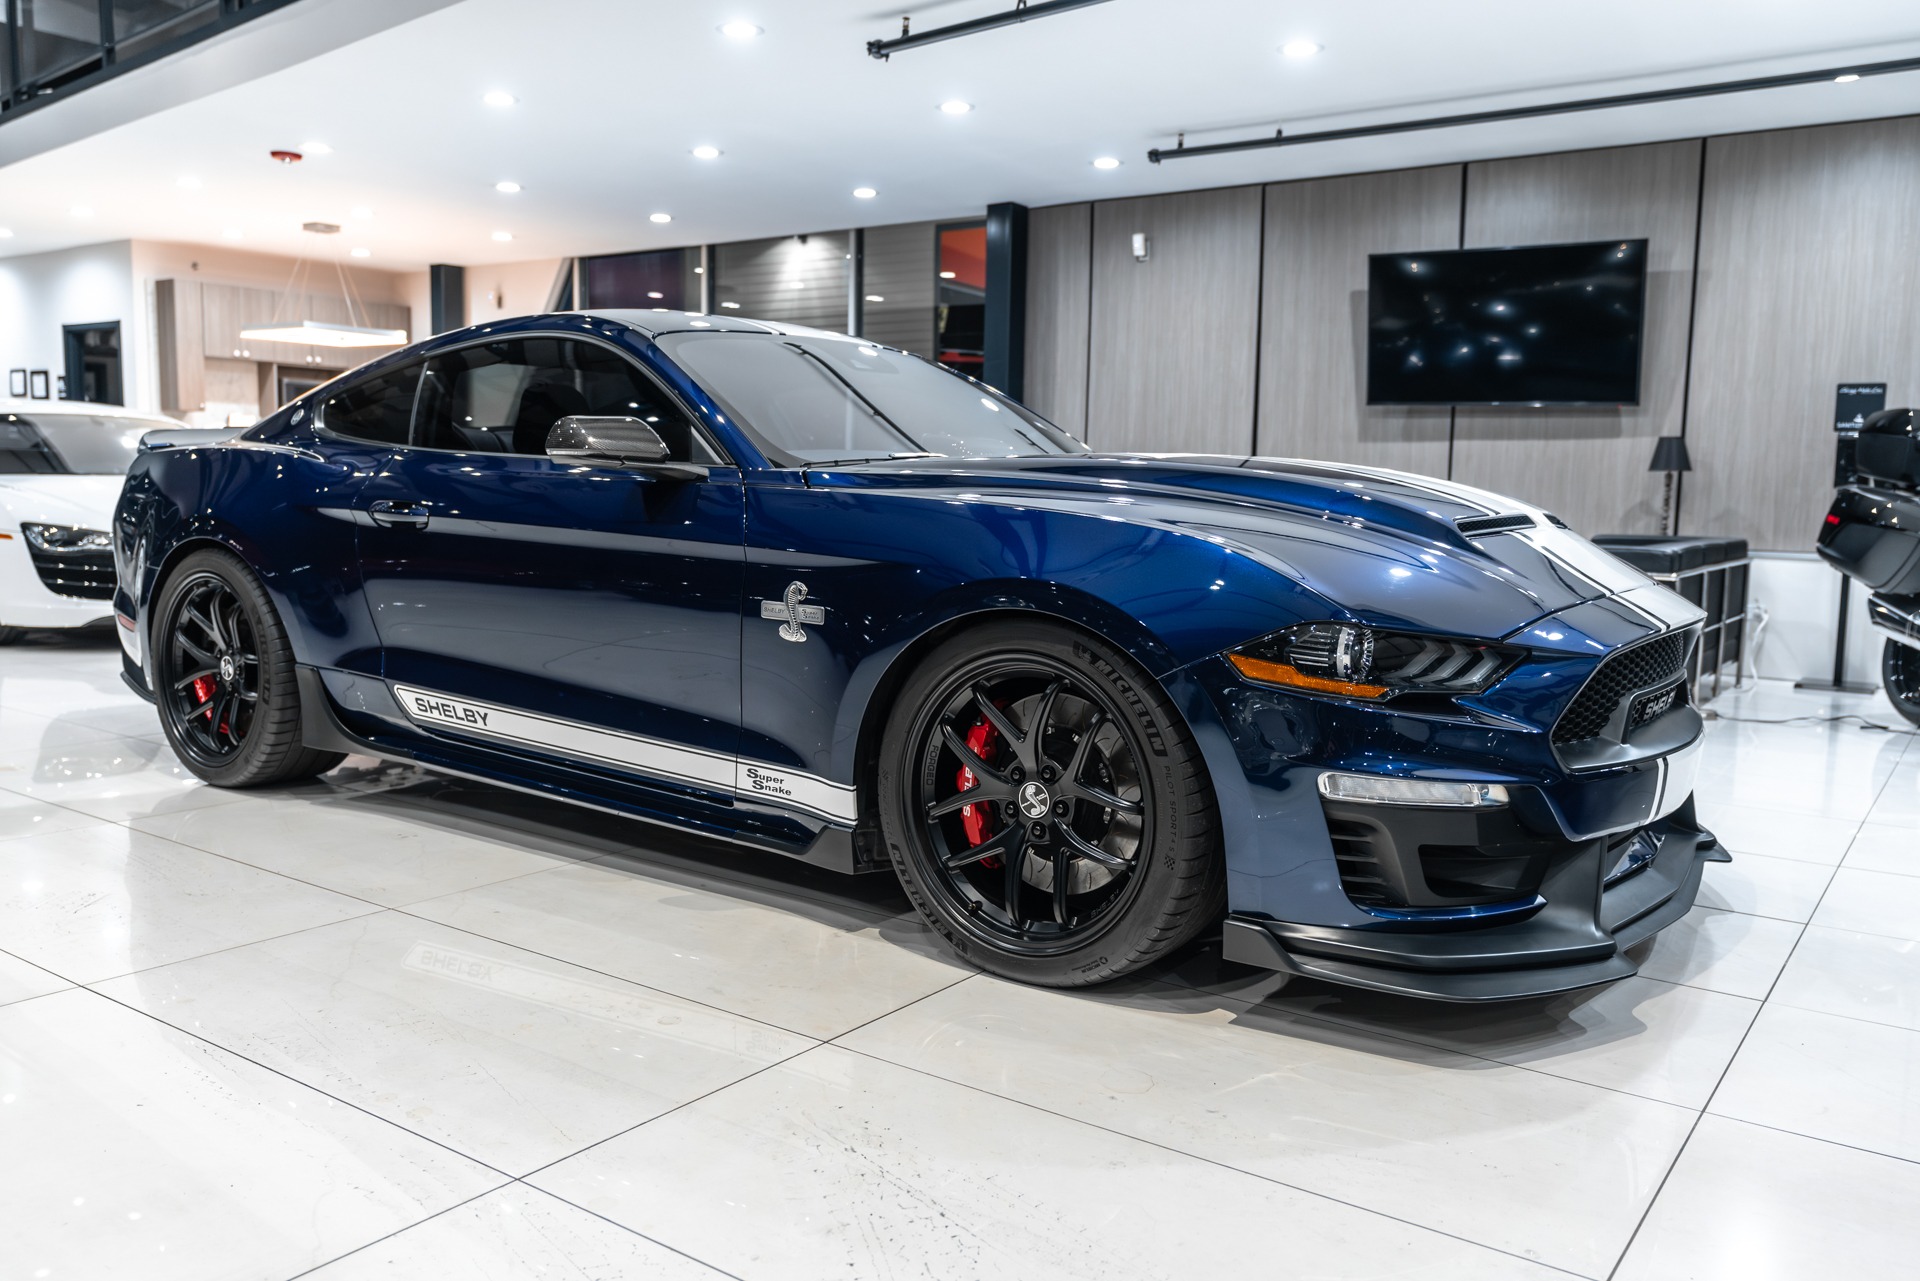 Used 2019 Ford Mustang Shelby Super Snake Coupe ONLY 2k Miles! 6-Speed ...